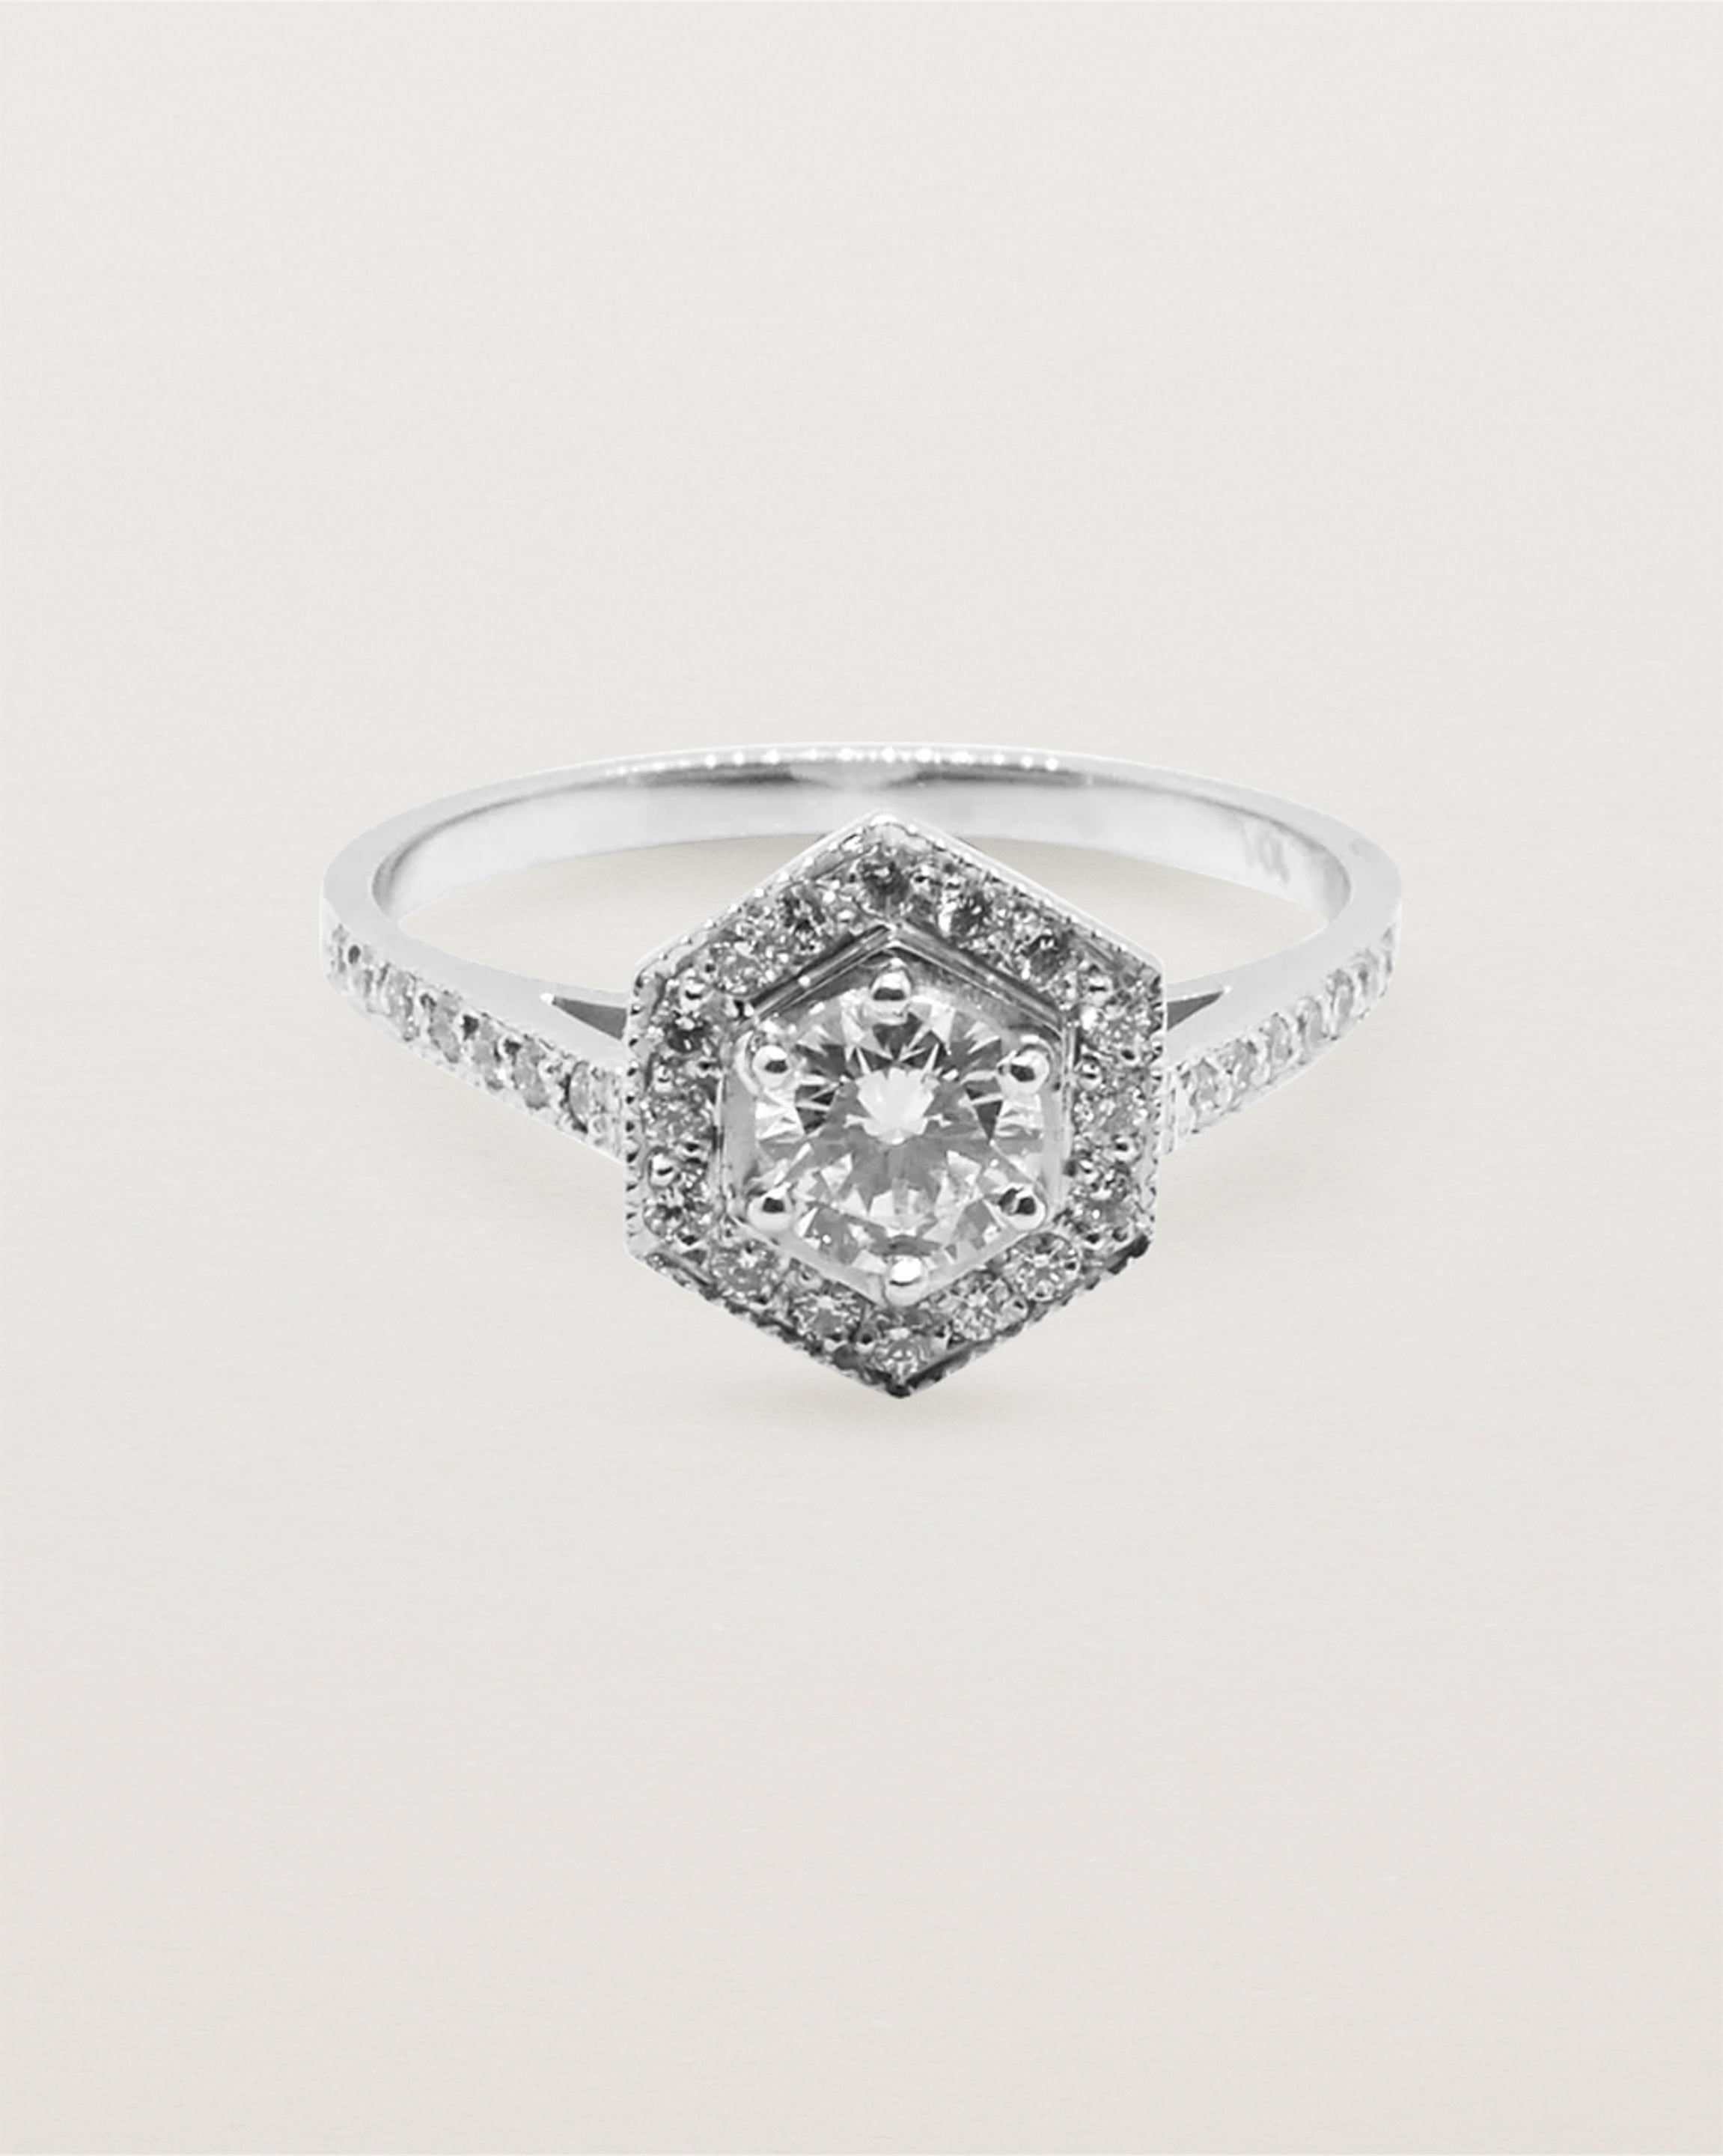 A hexagonal halo diamond ring featuring a central 0.32 carat round cut diamond and surrounded by a diamond halo.